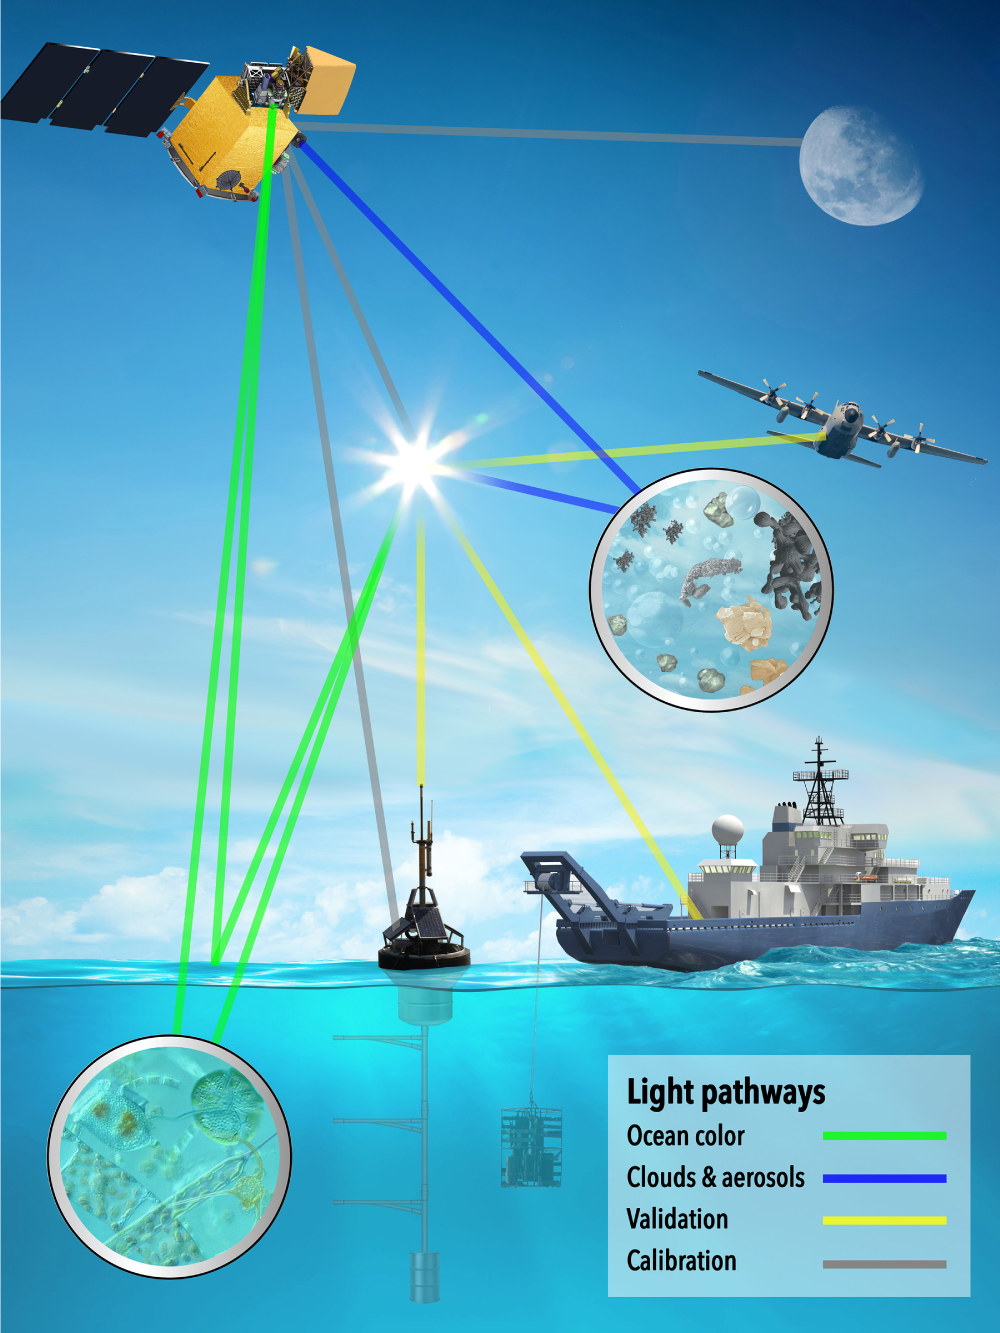 Scientists will use several instruments and tools to gather and measure optical and biogeochemical particle data. Some will use light to measure qualities such as backscatter. Others will physically collect or filter water. Remote-sensing data will also be gathered.